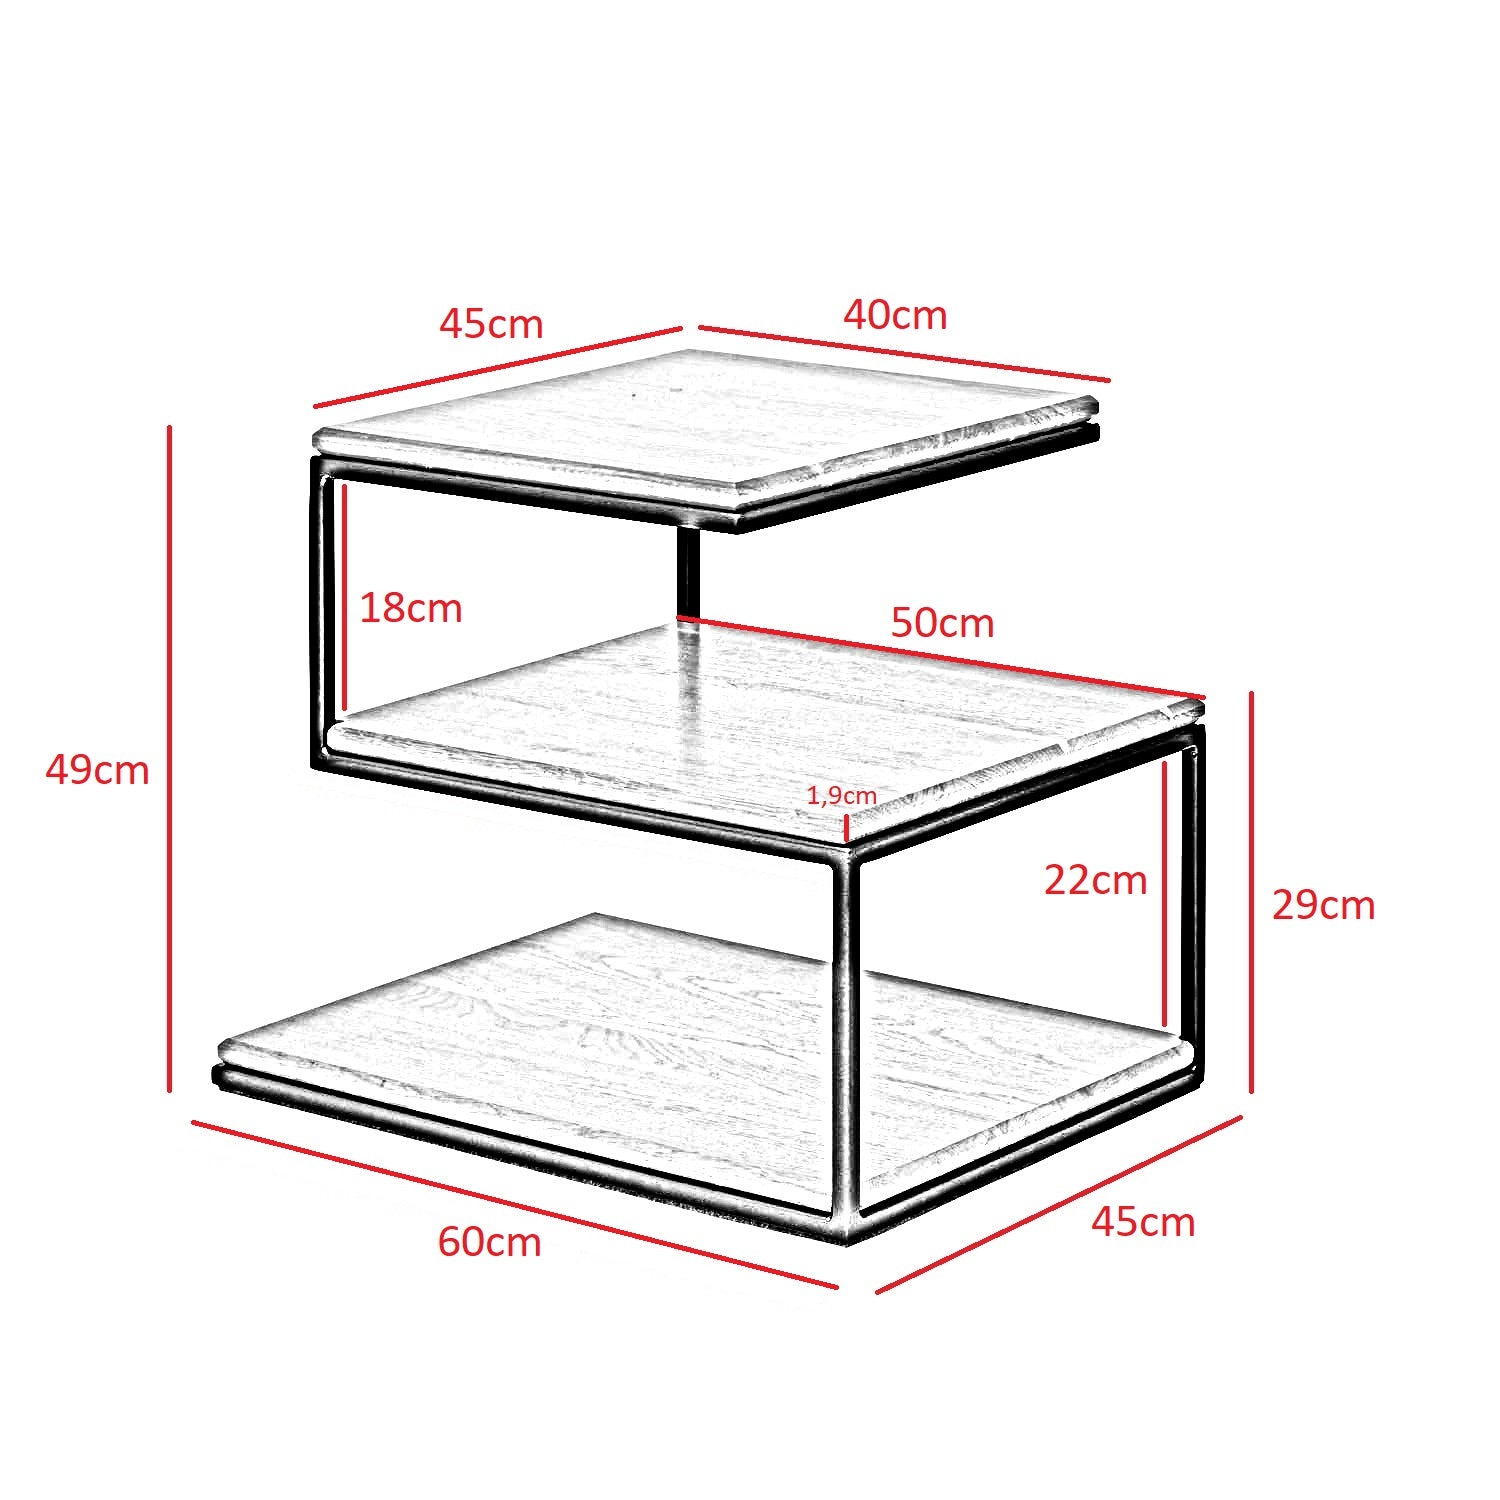 Cube-Layer-Table_Dimensions.jpg